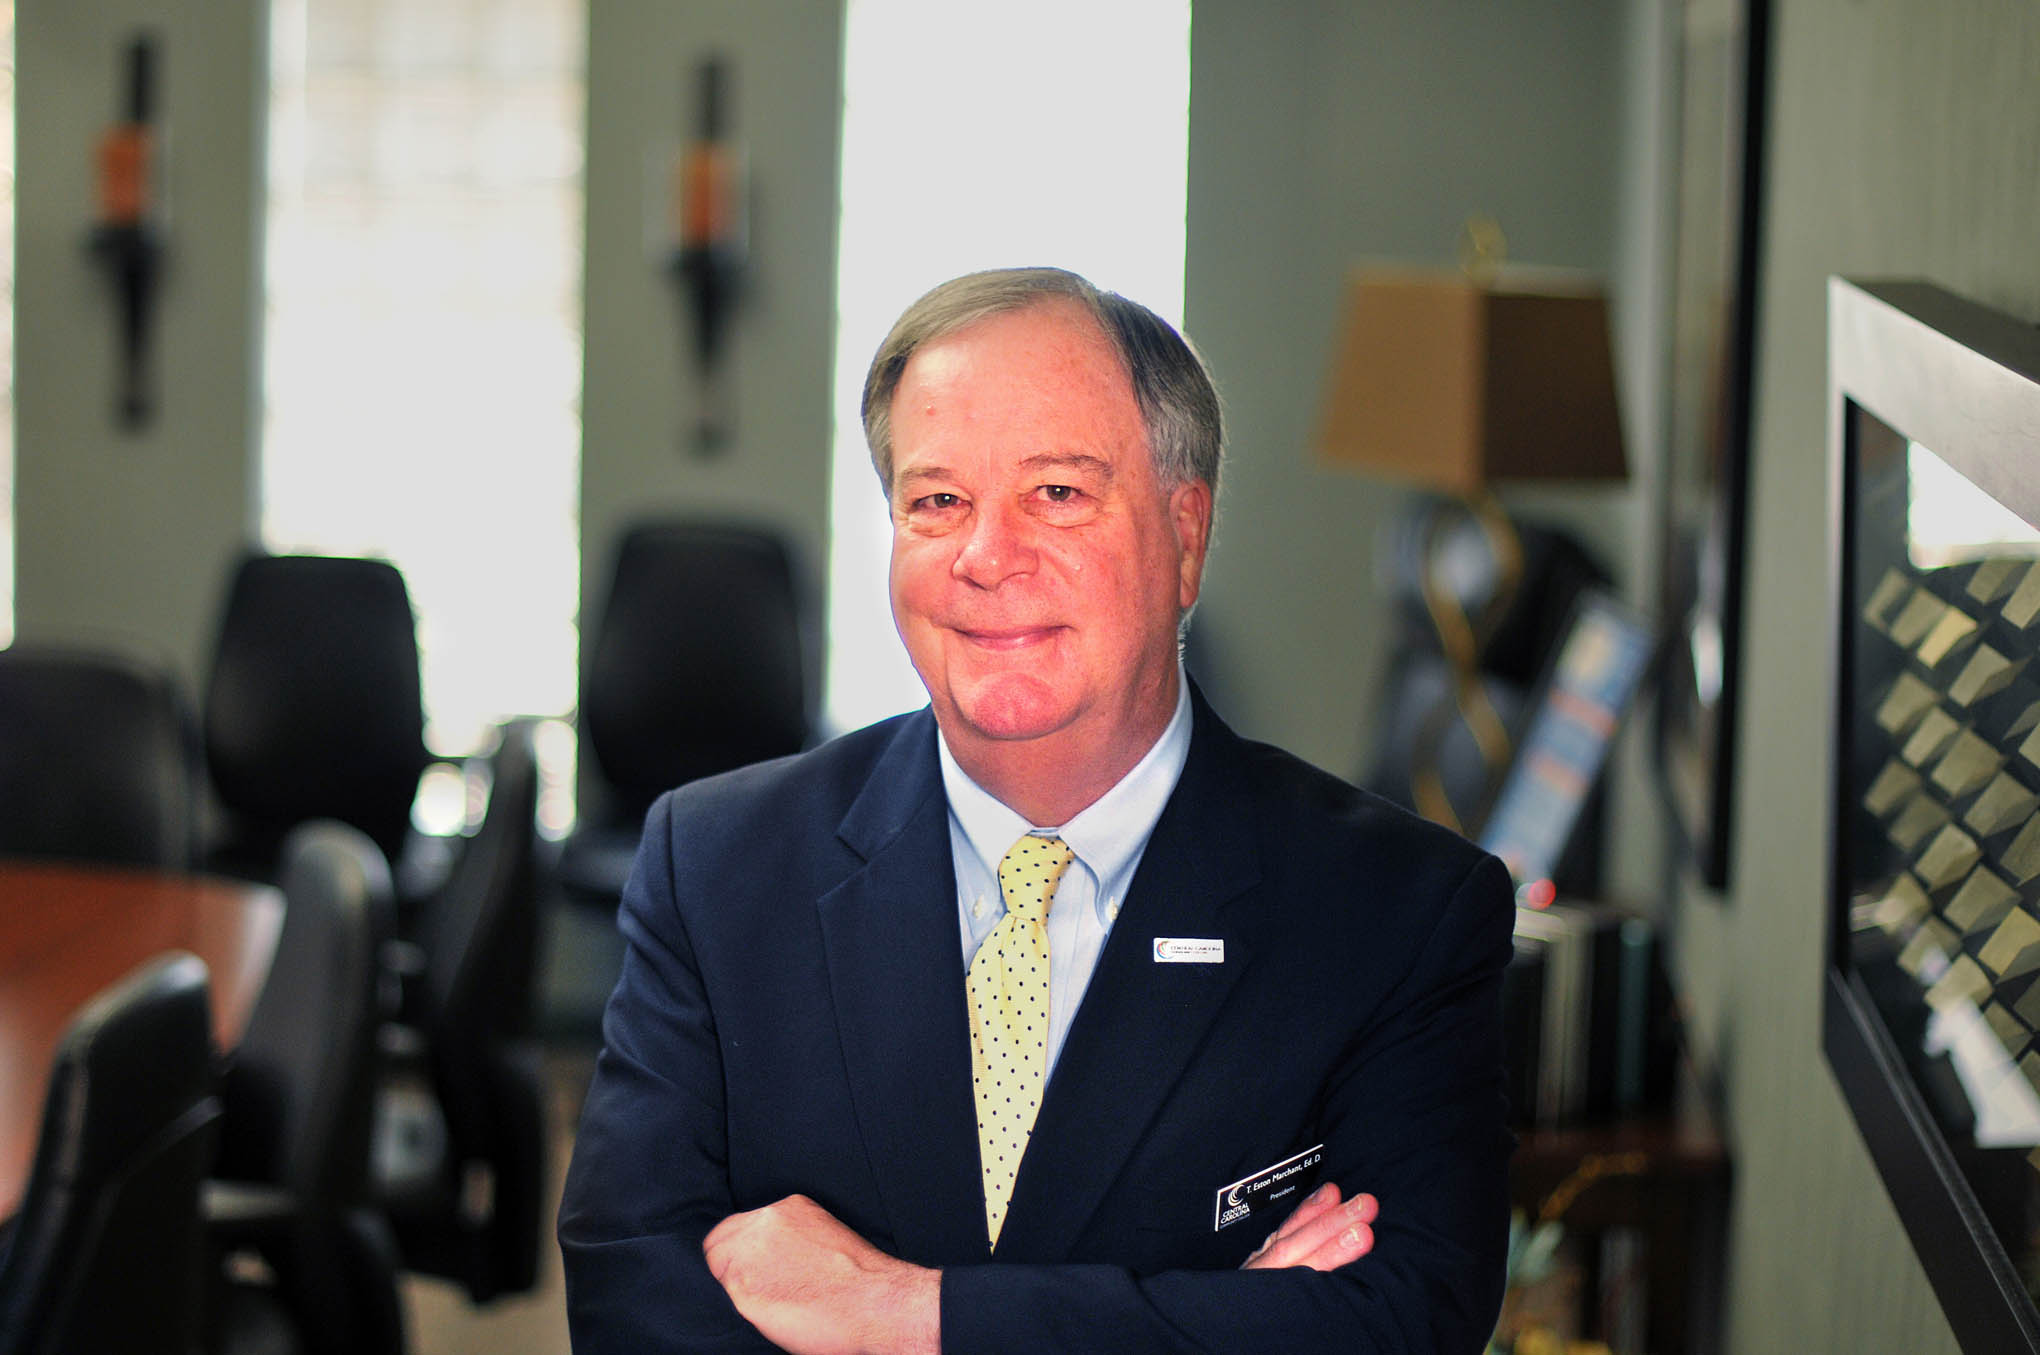 Click to enlarge,  Dr. T. Eston "Bud" Marchant is retiring as President of Central Carolina Community College, effective April 1, 2019. 